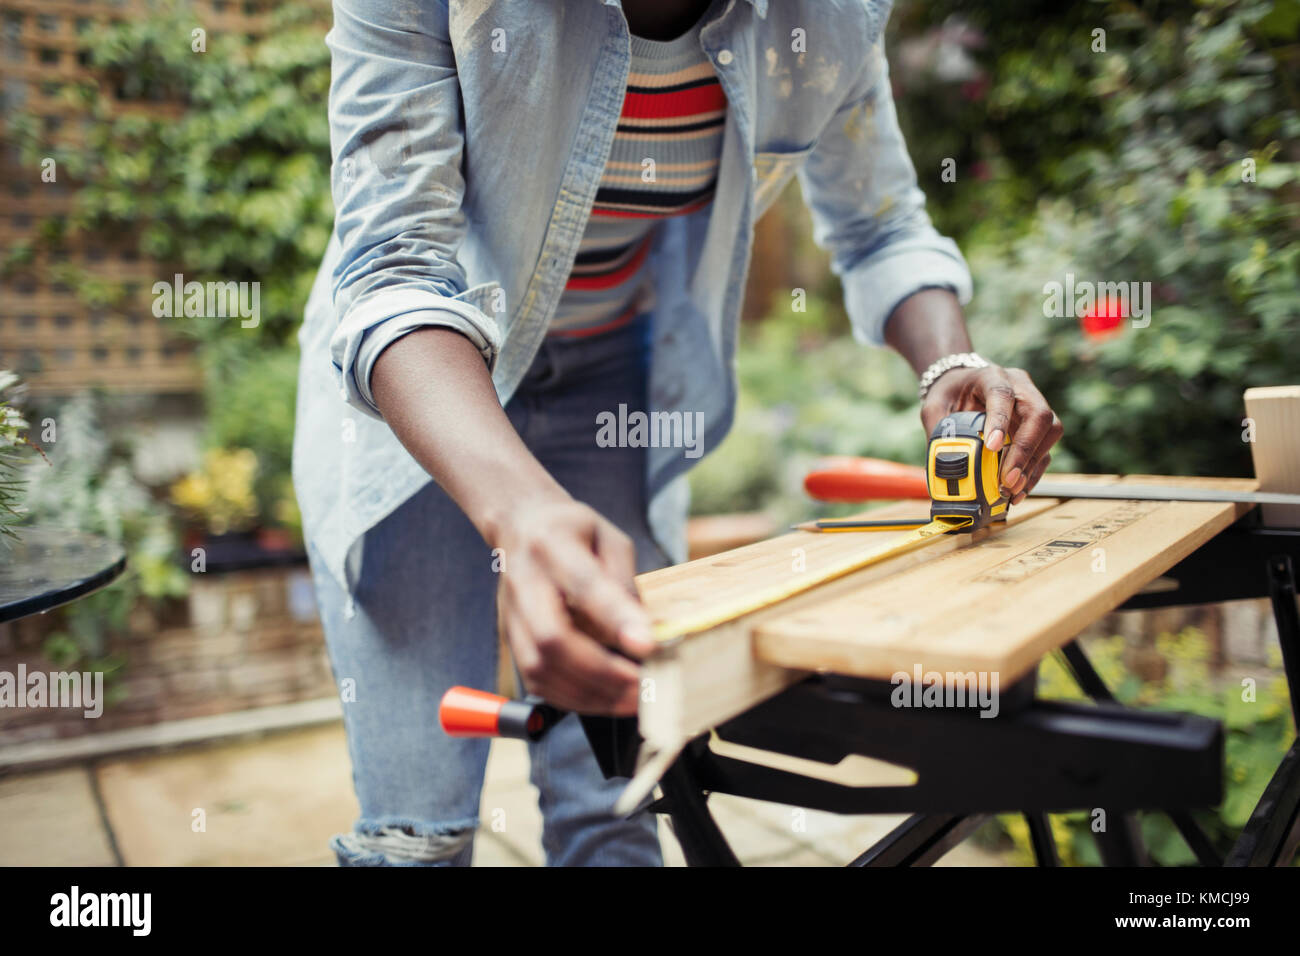 Woman with tape measure measuring wood on patio Stock Photo